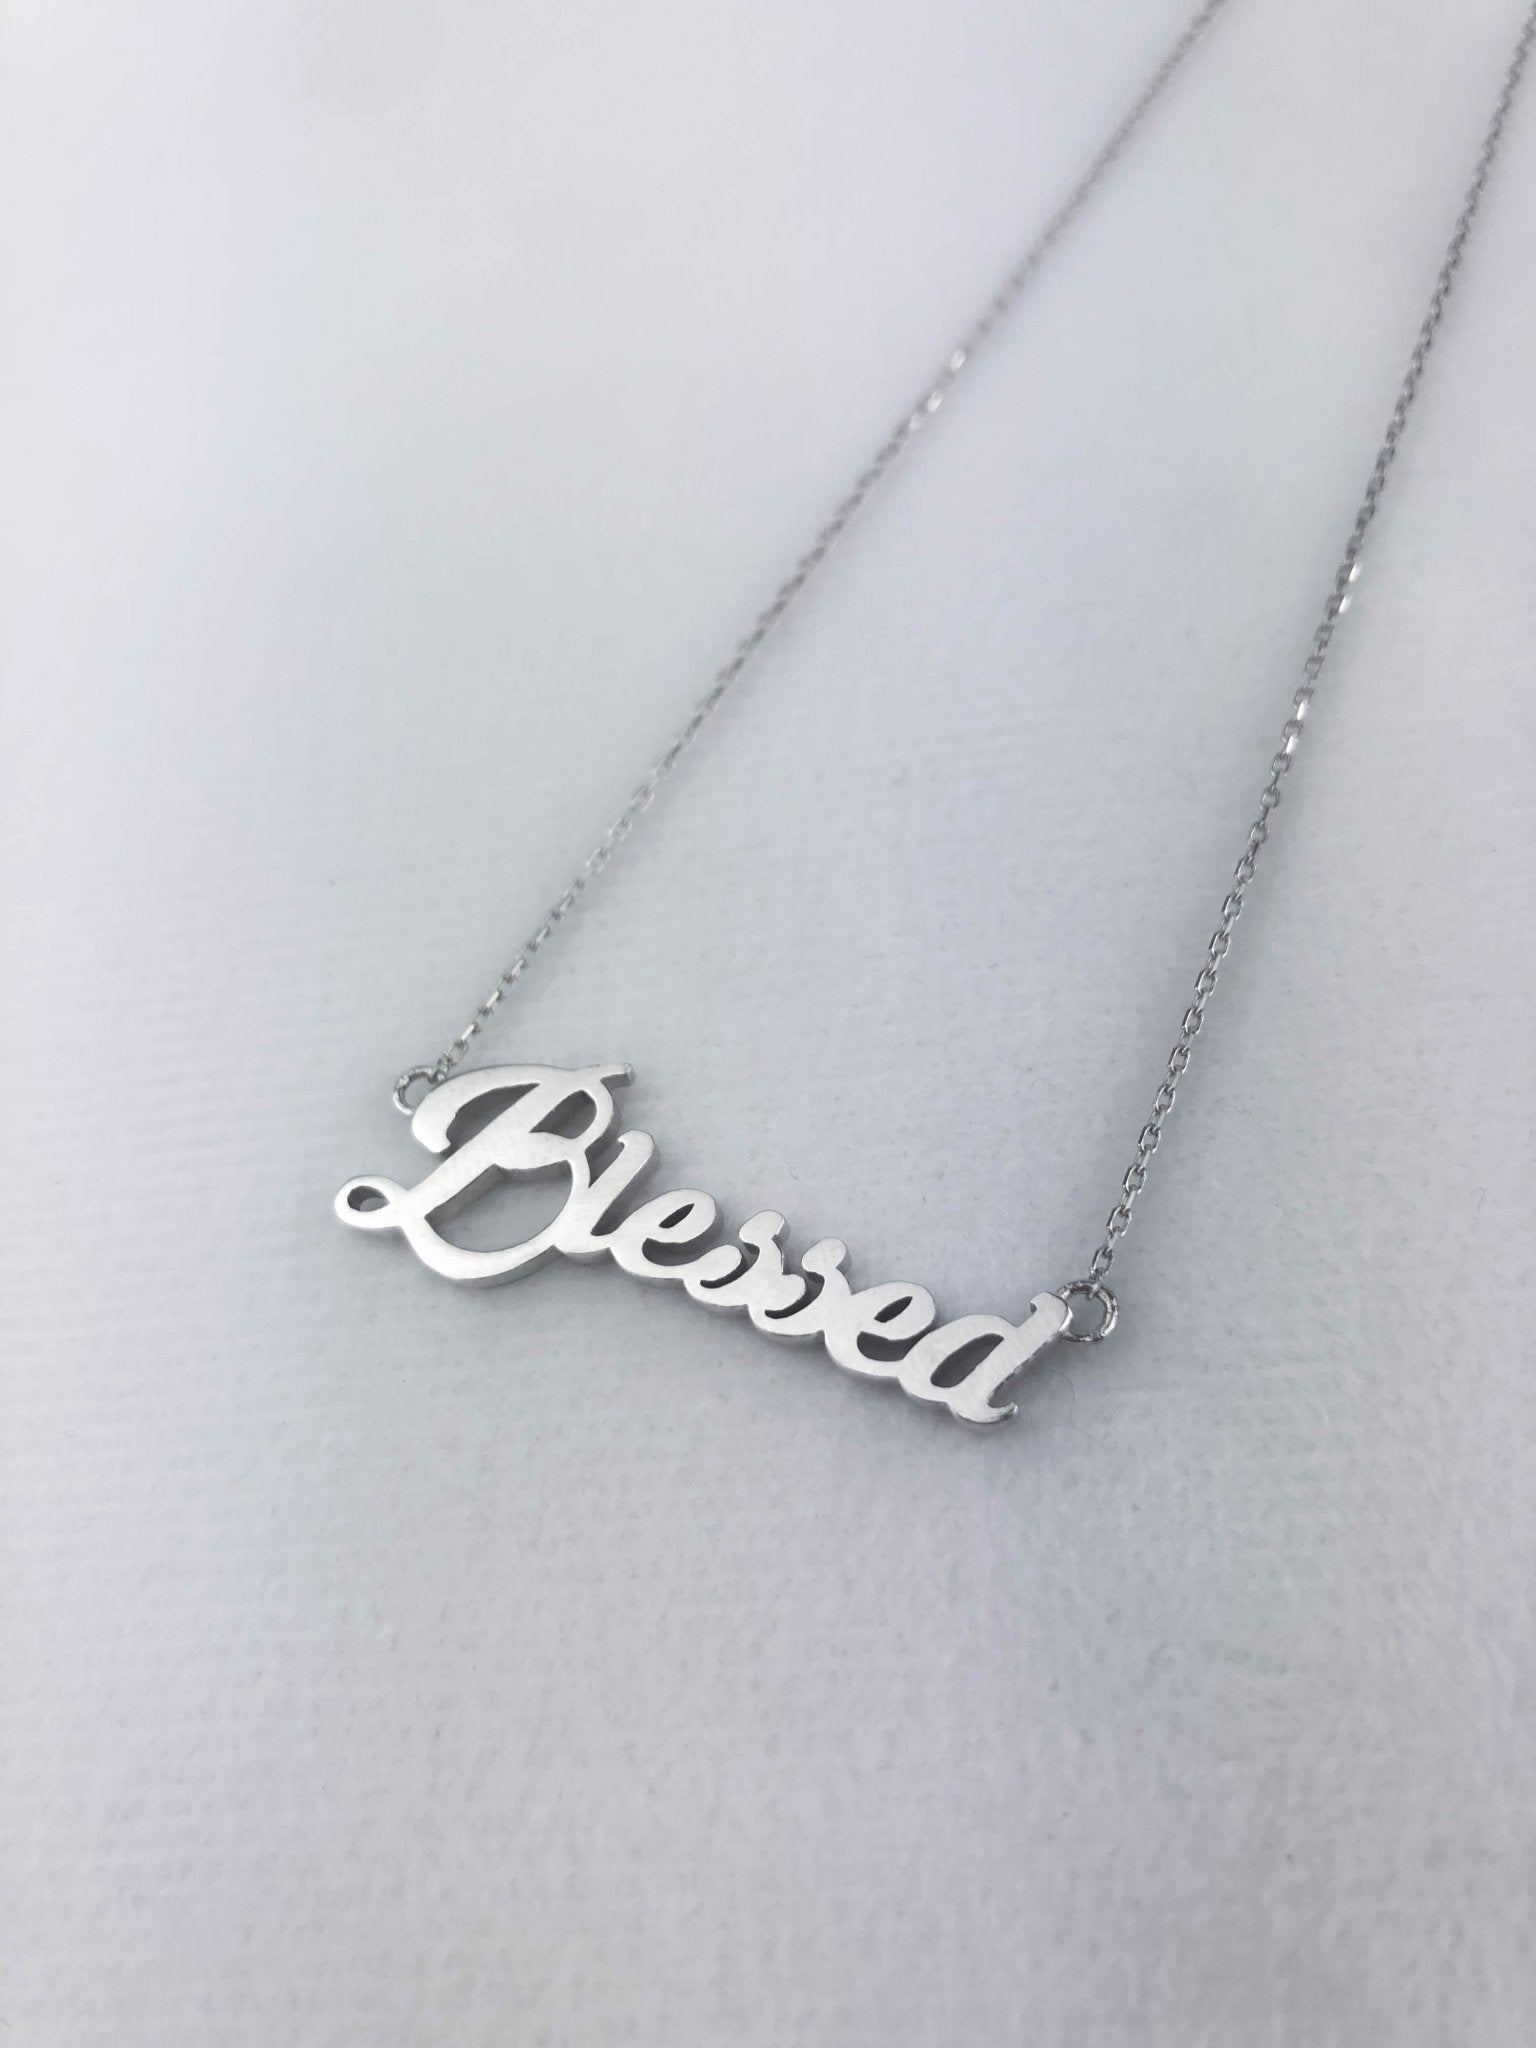 Blessed sterling silver pendent with an 18 inch chain on a white background